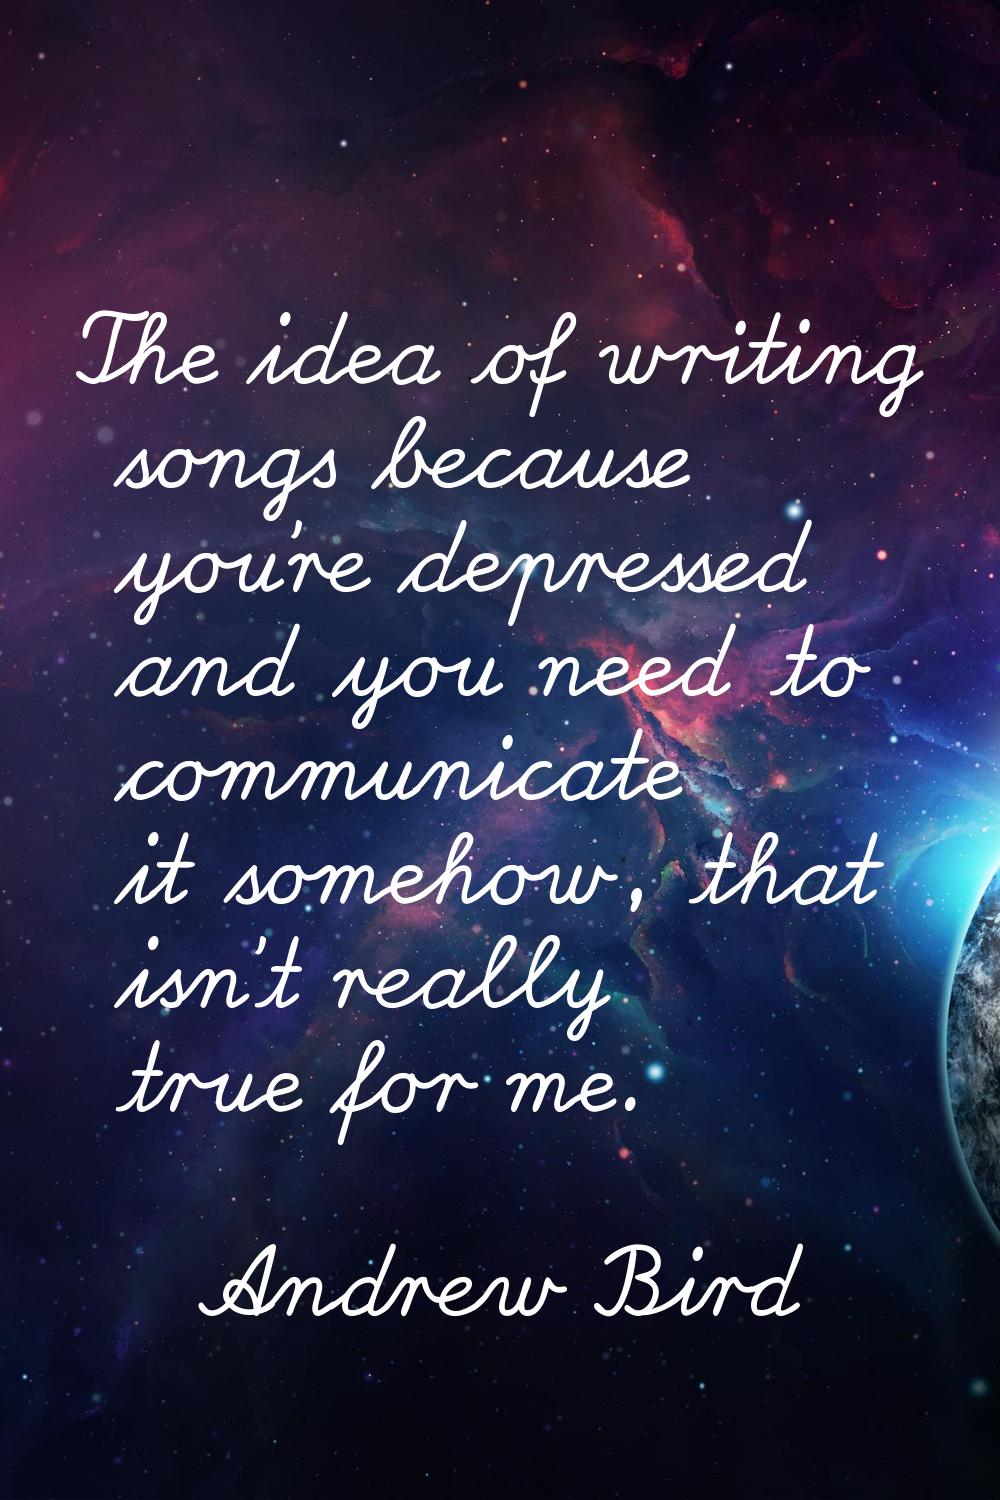 The idea of writing songs because you're depressed and you need to communicate it somehow, that isn